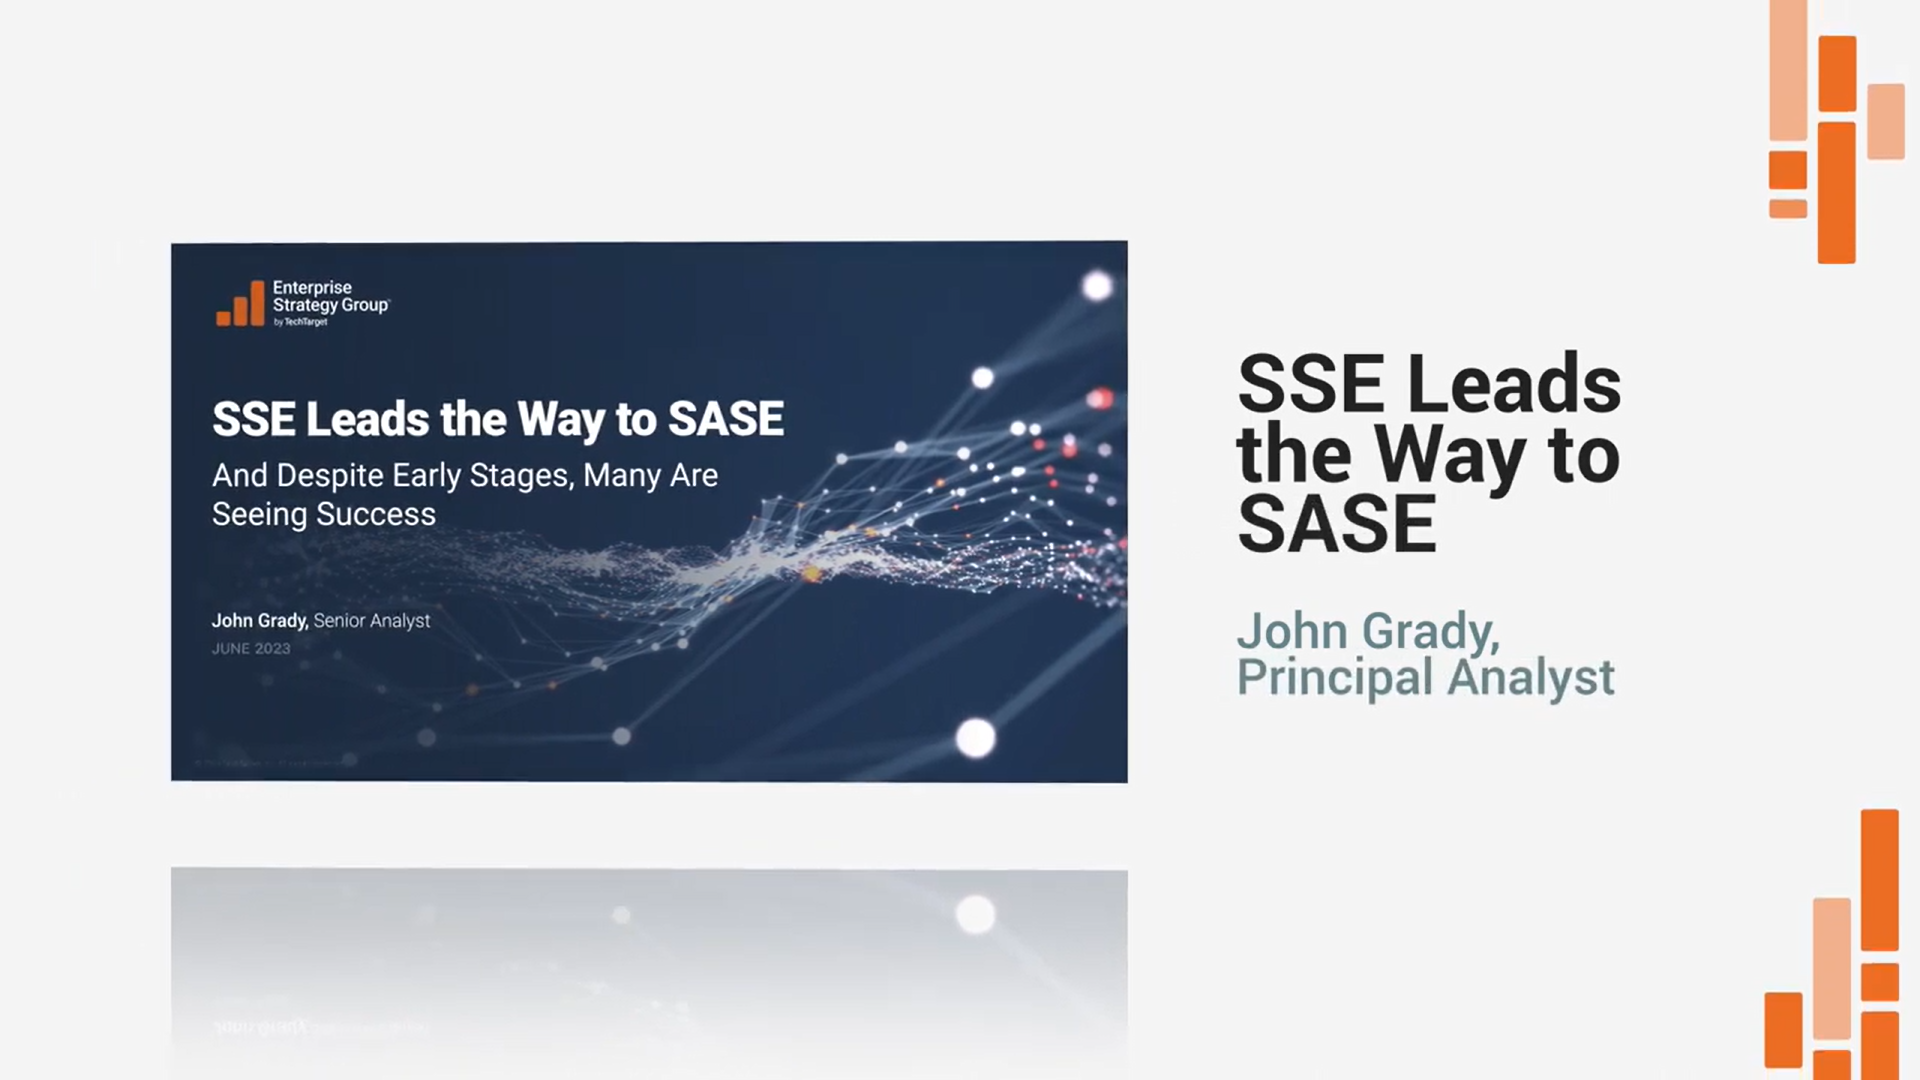 SSE Leads the Way to SASE